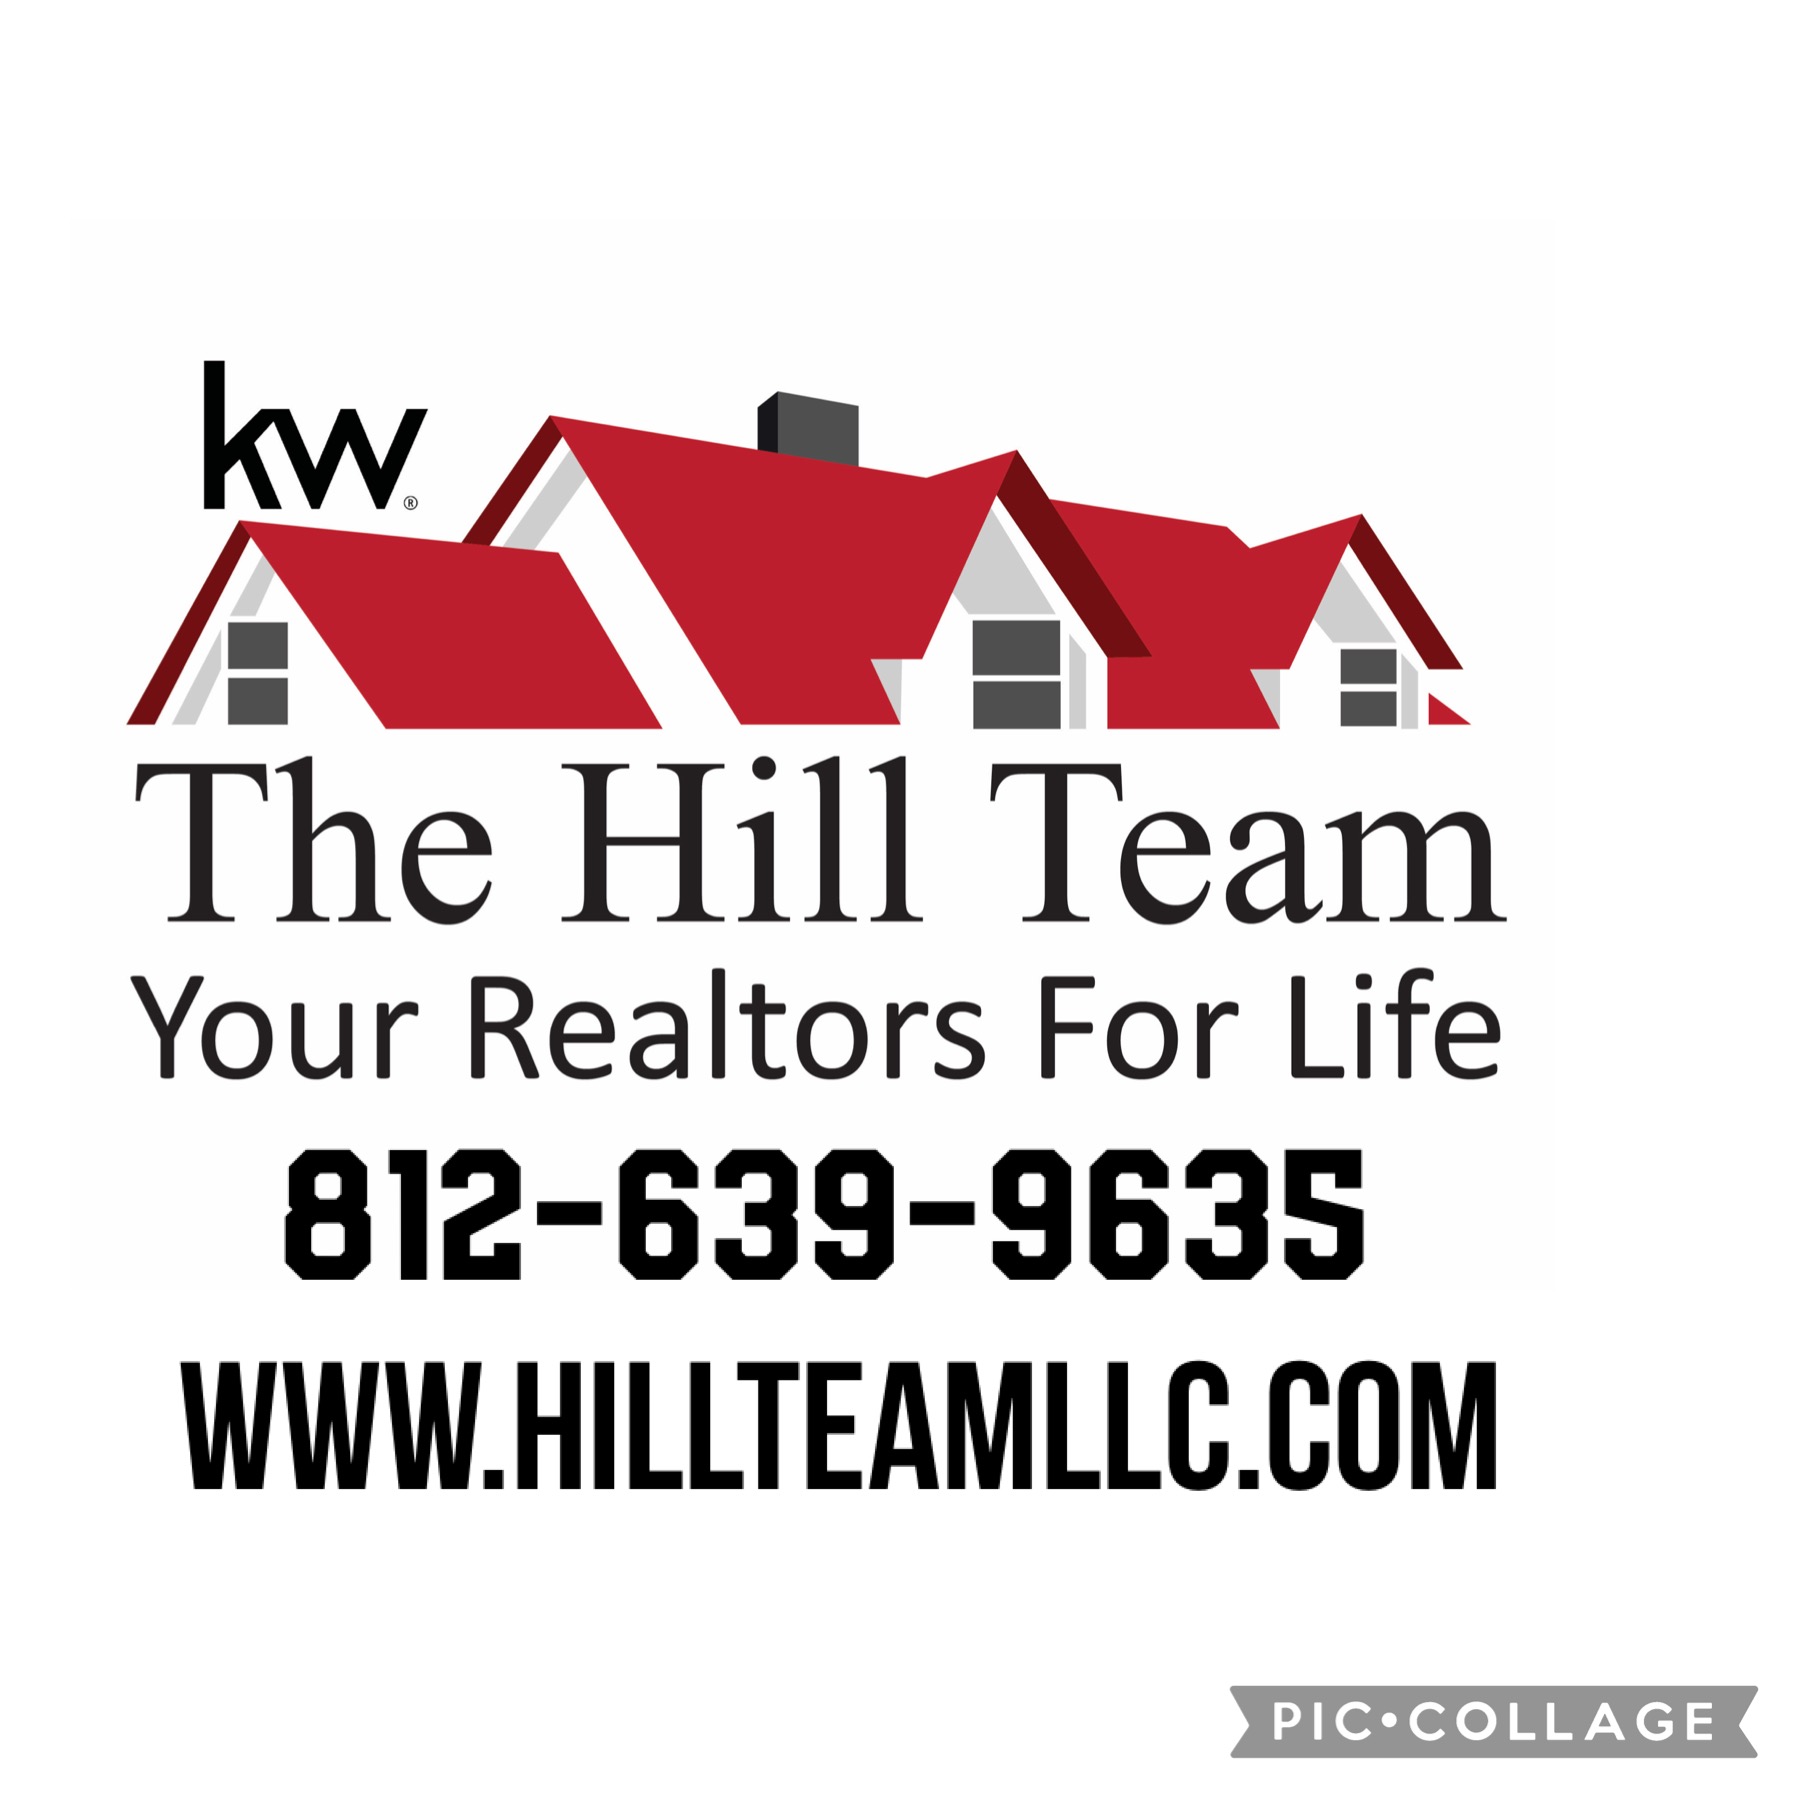 The Hill Team